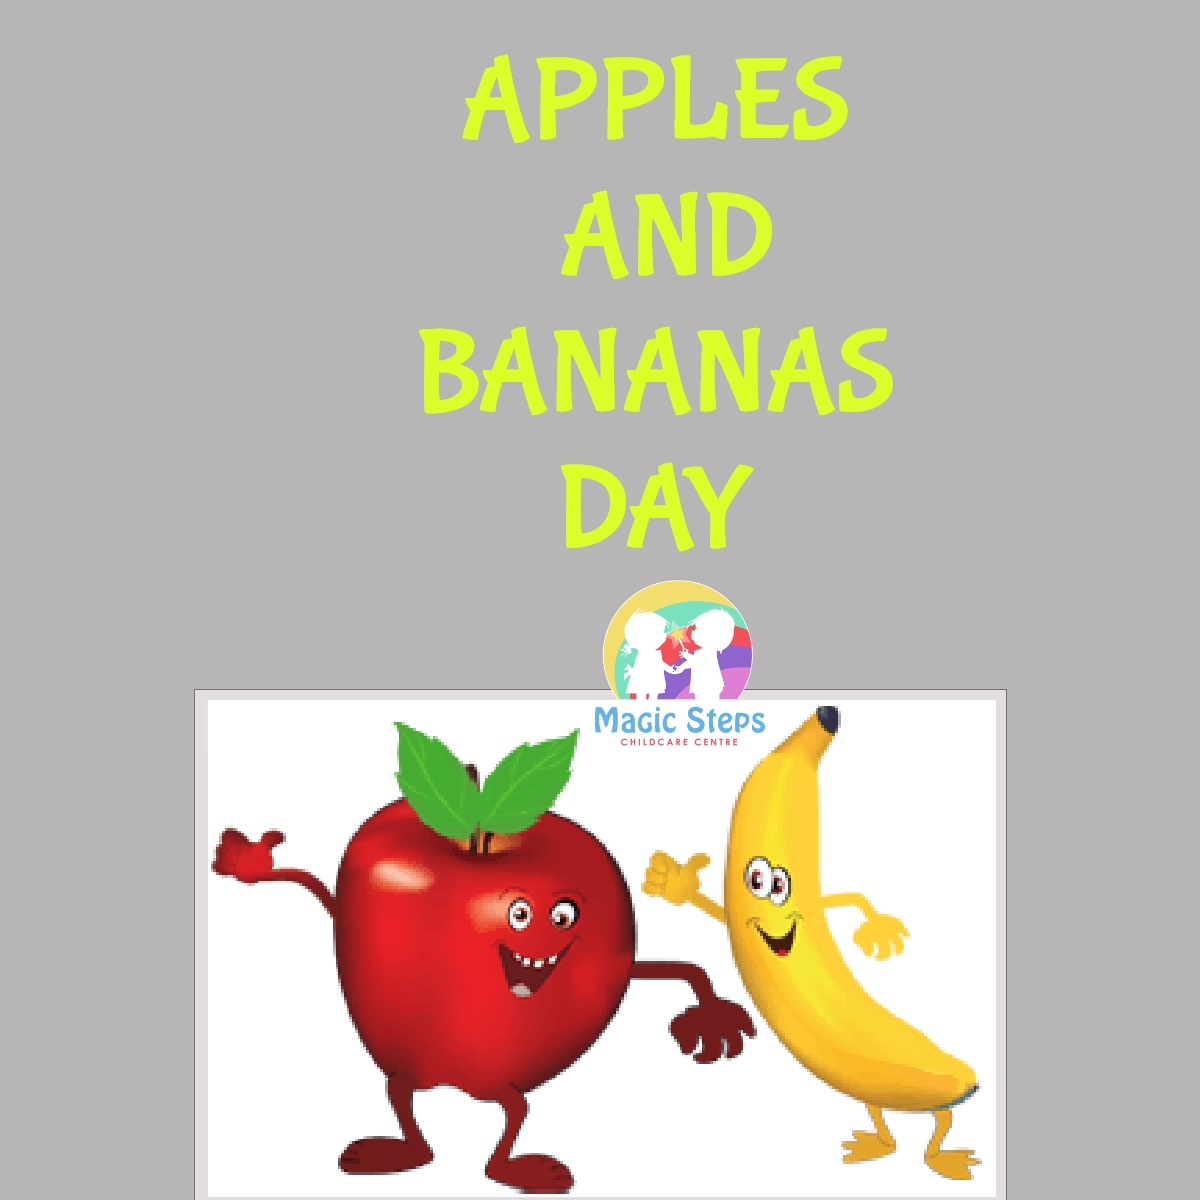 Apples and Bananas Day- Friday 24th September